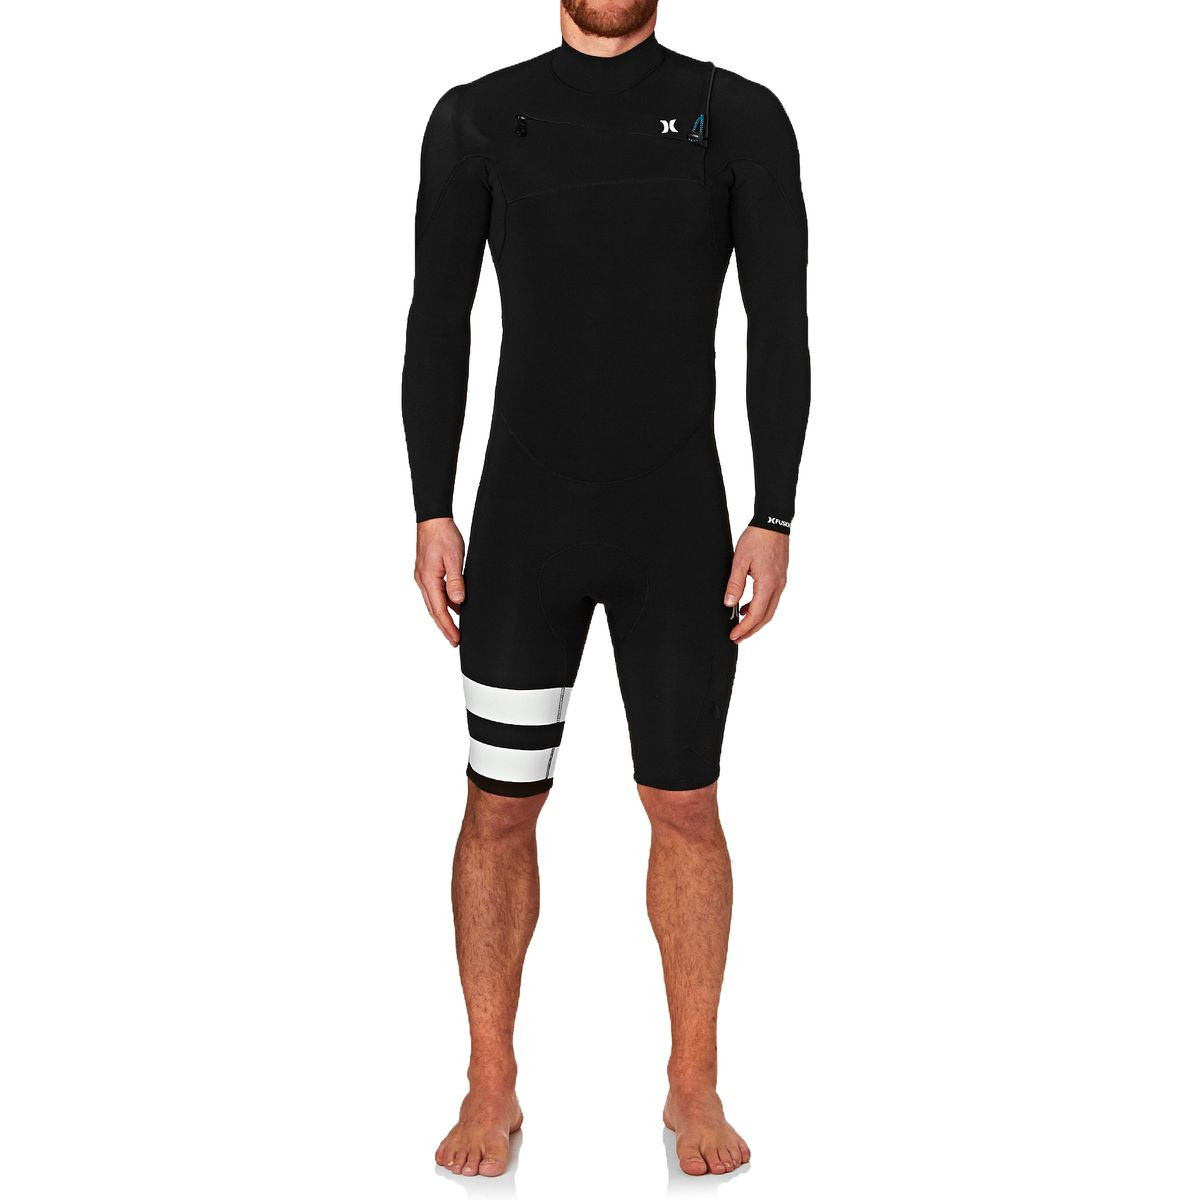 Hurley Fusion 2mm 2017 Chest Zip Long Sleeve Shorty Wetsuit - Black